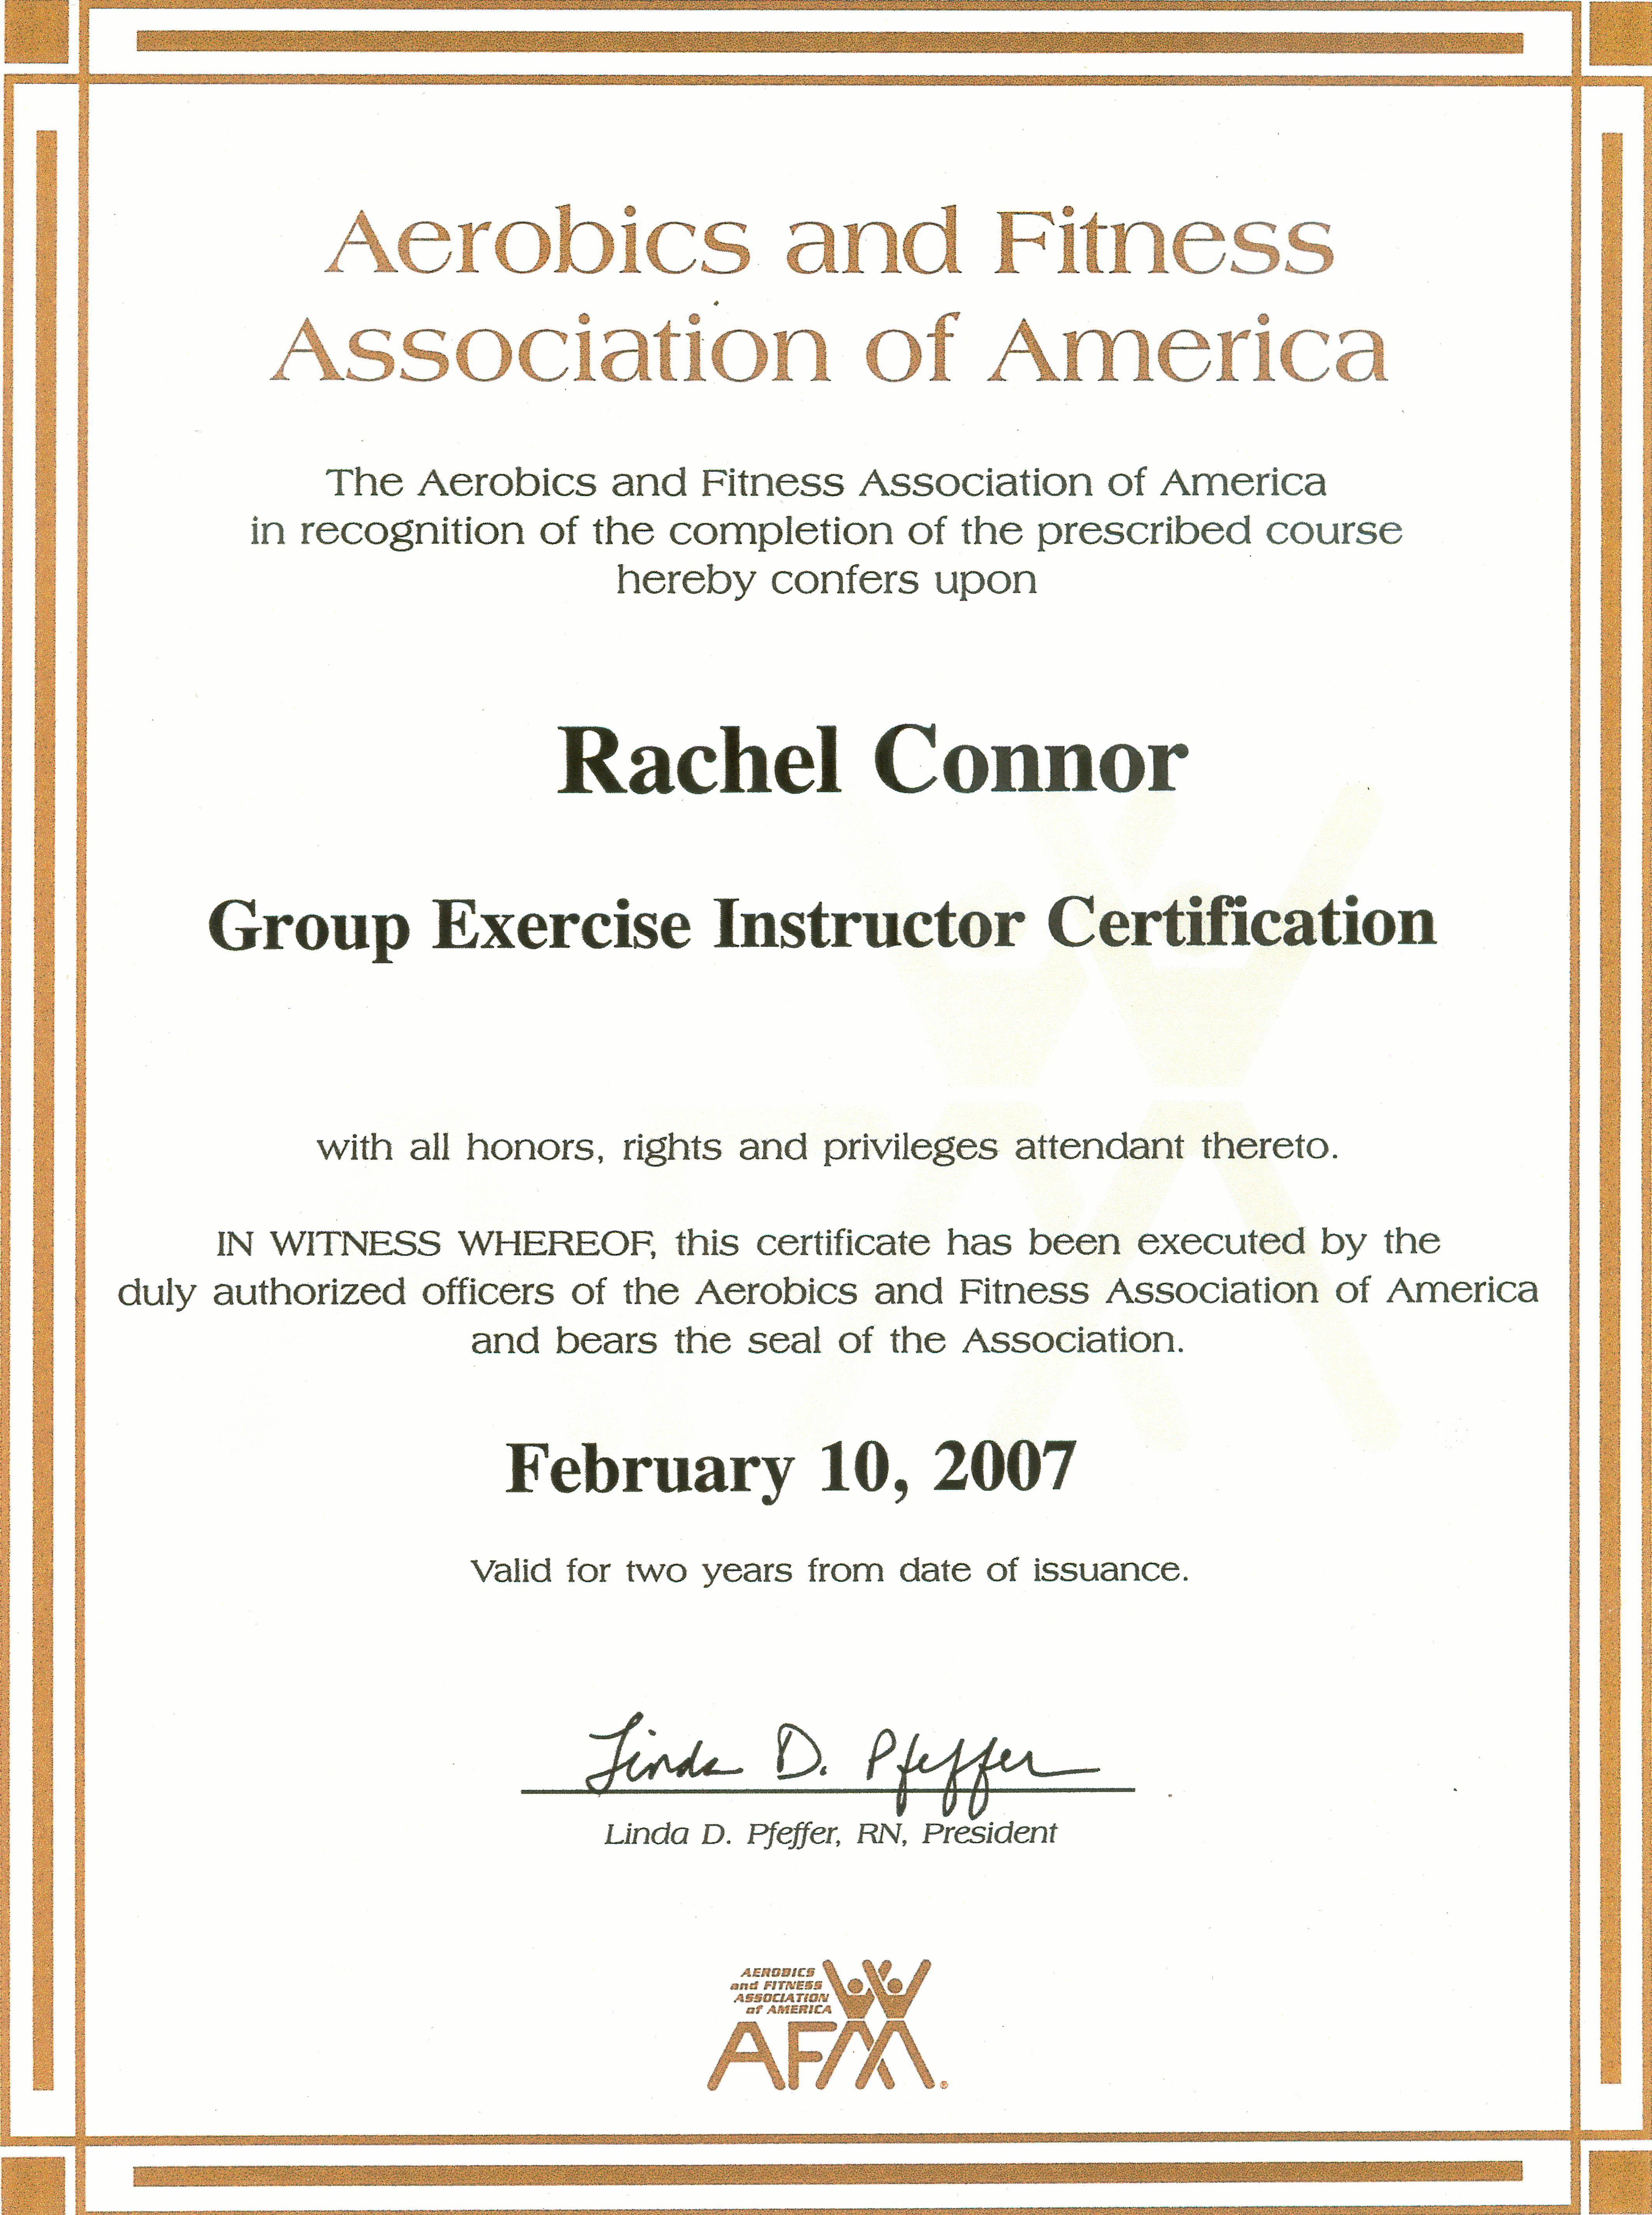 Group Excercise Instructor Certificate